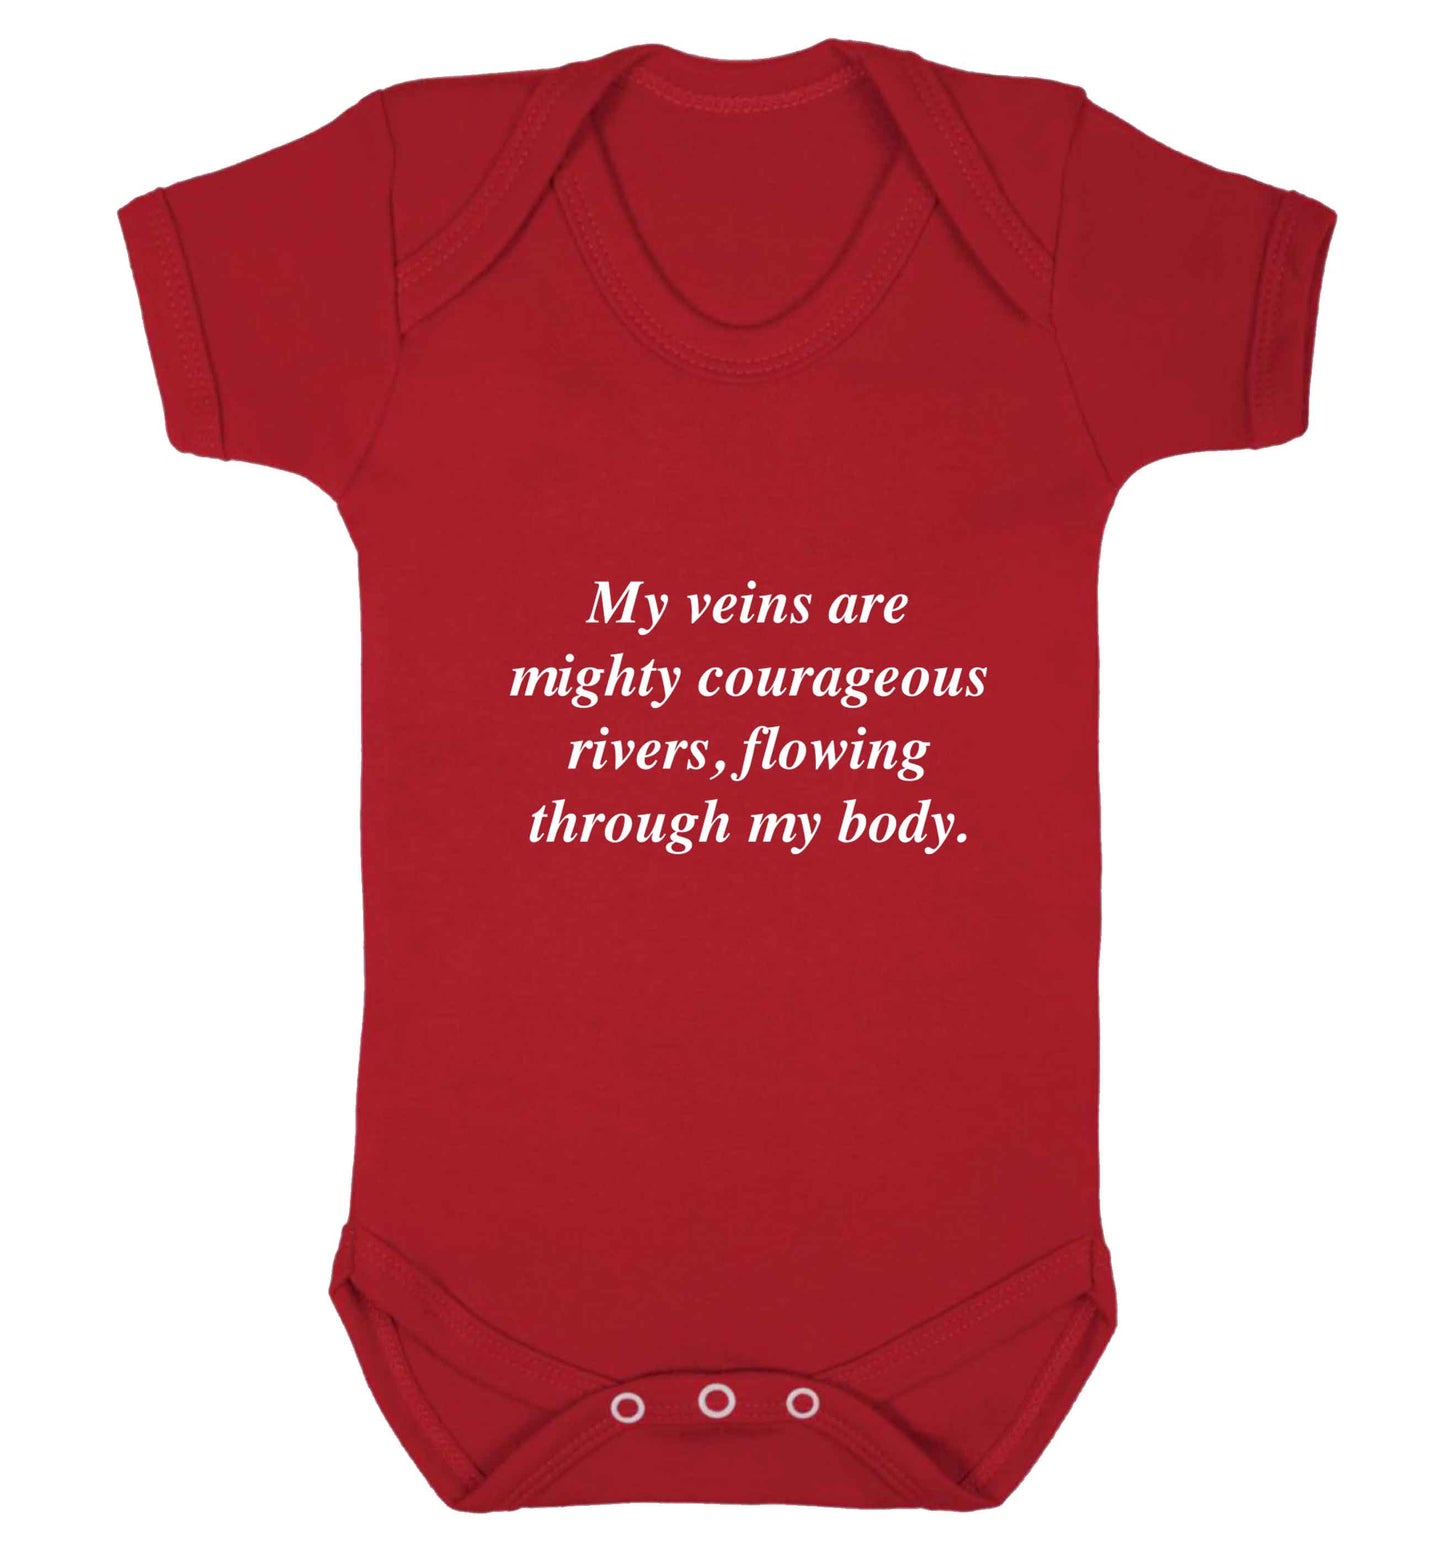 My veins are mighty courageous rivers, flowing through my body baby vest red 18-24 months